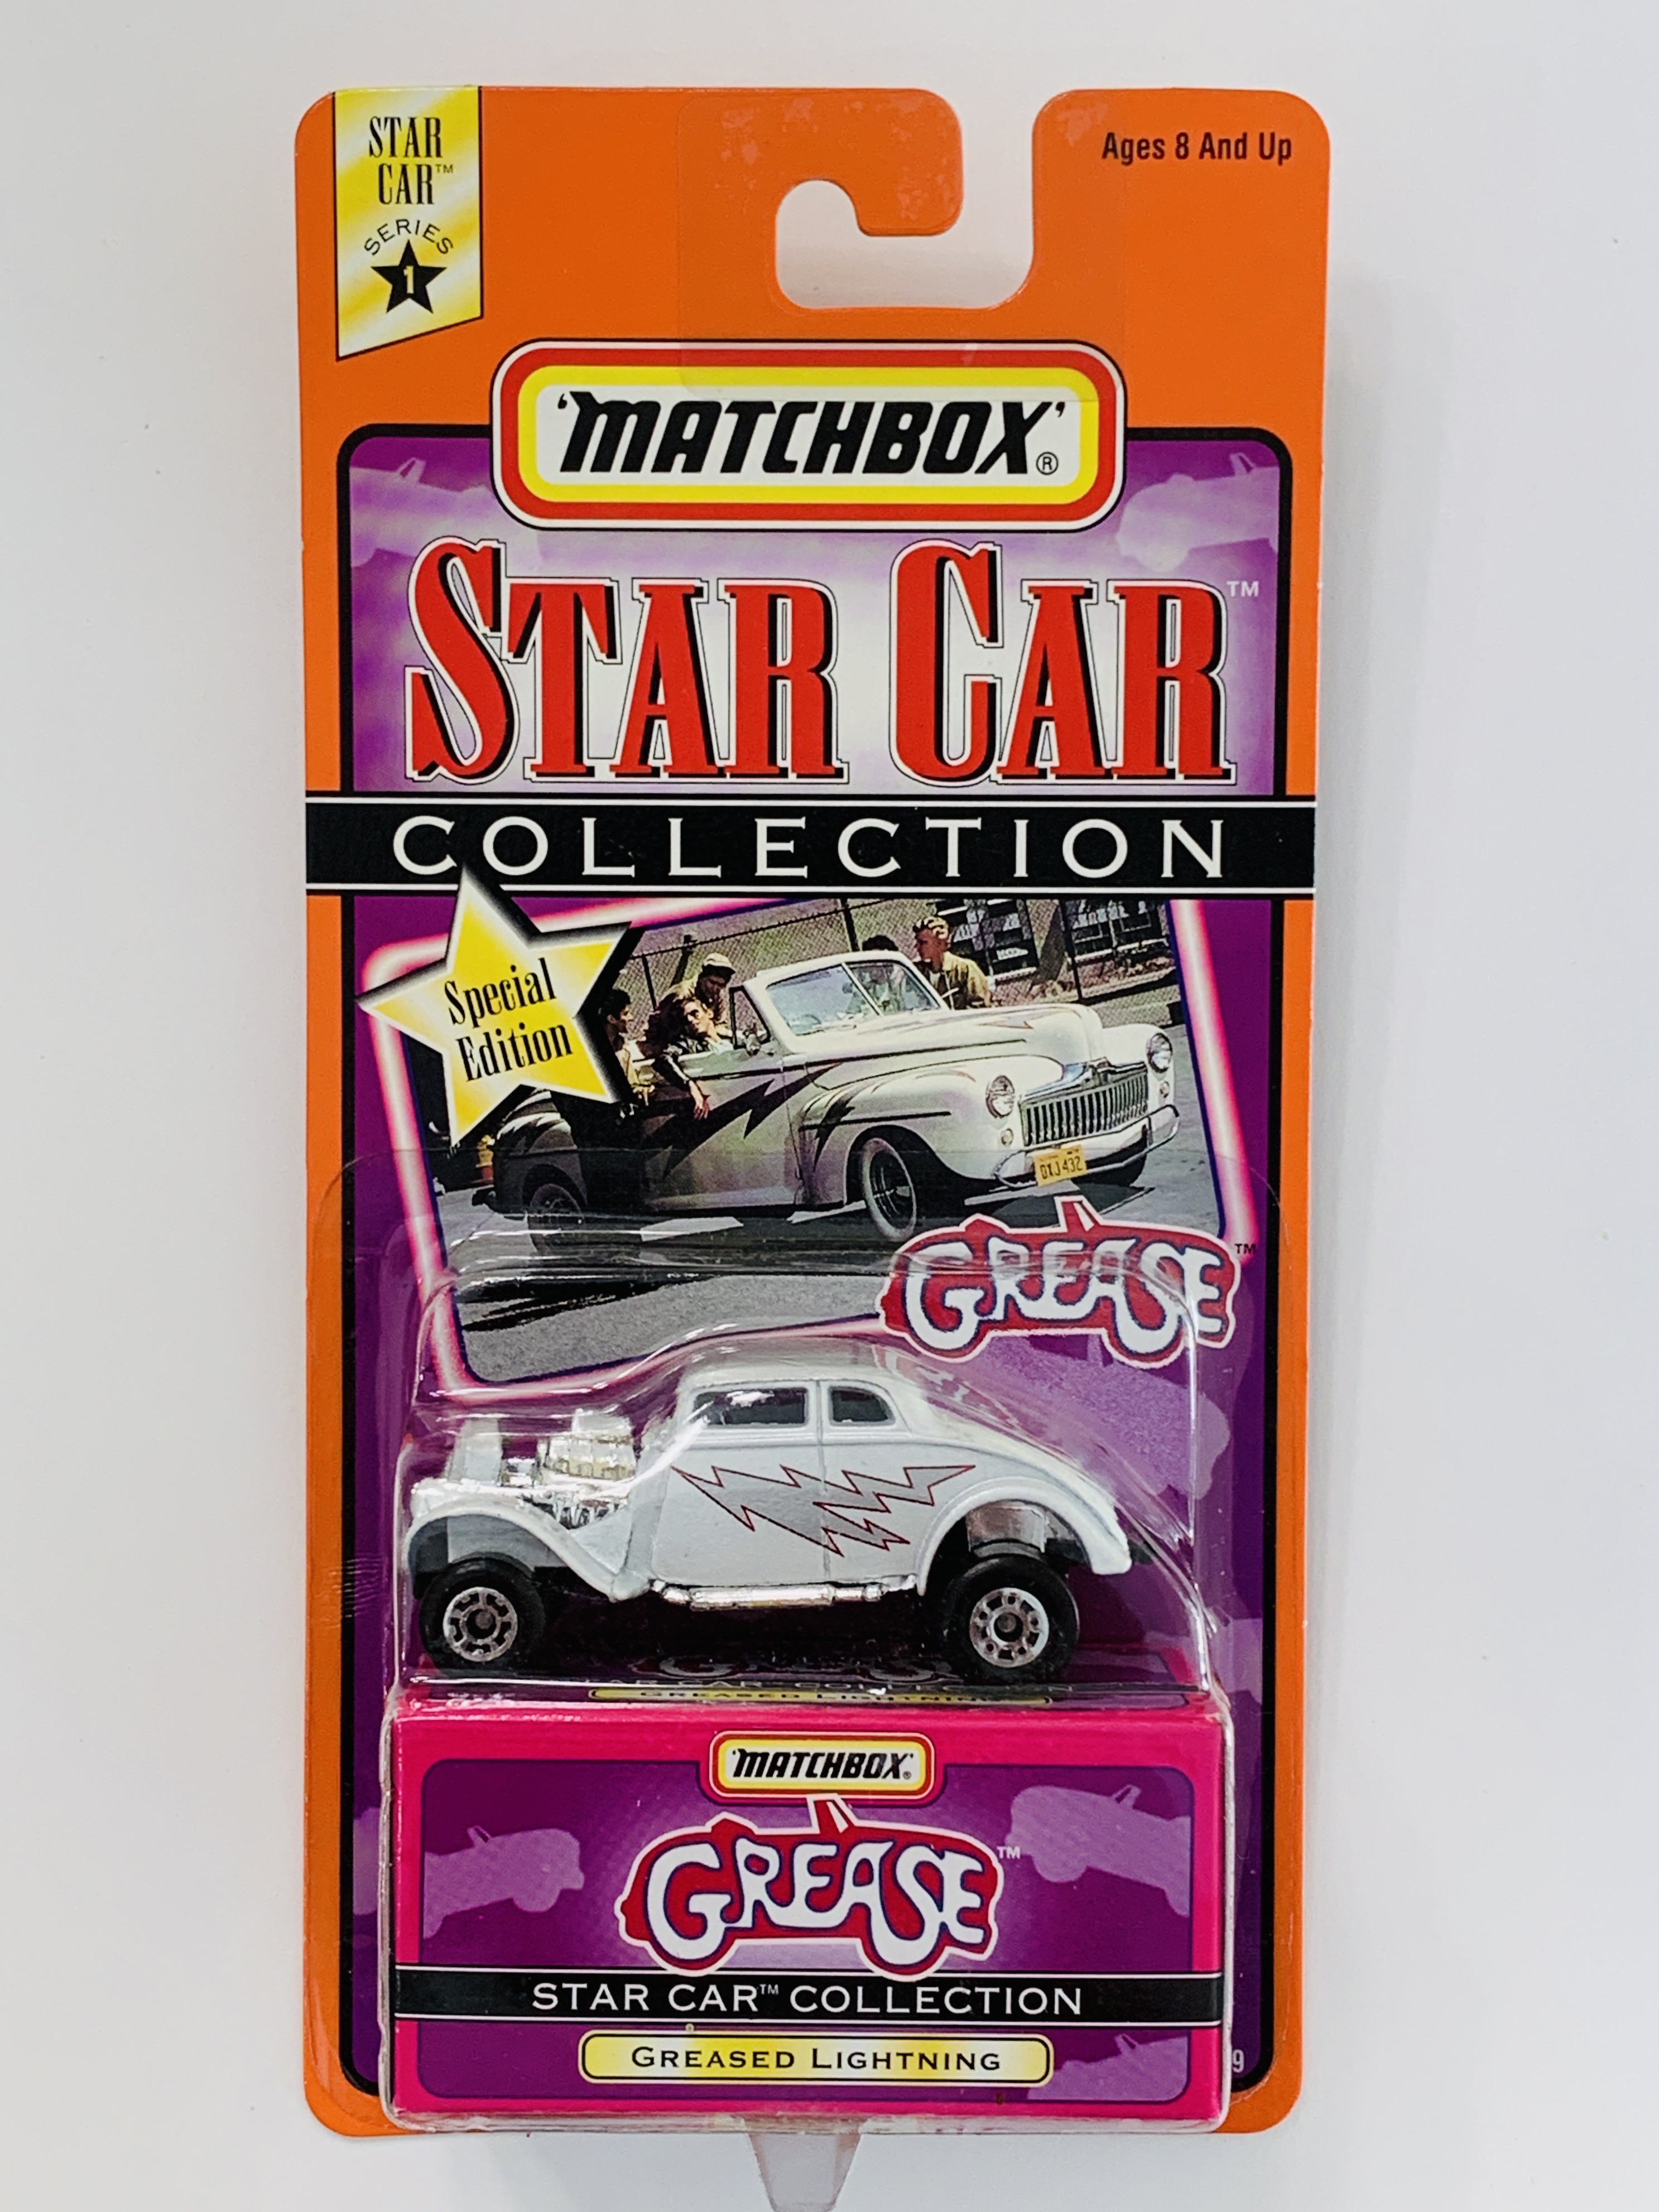 Matchbox Star Car Collection Grease Greased Lightning